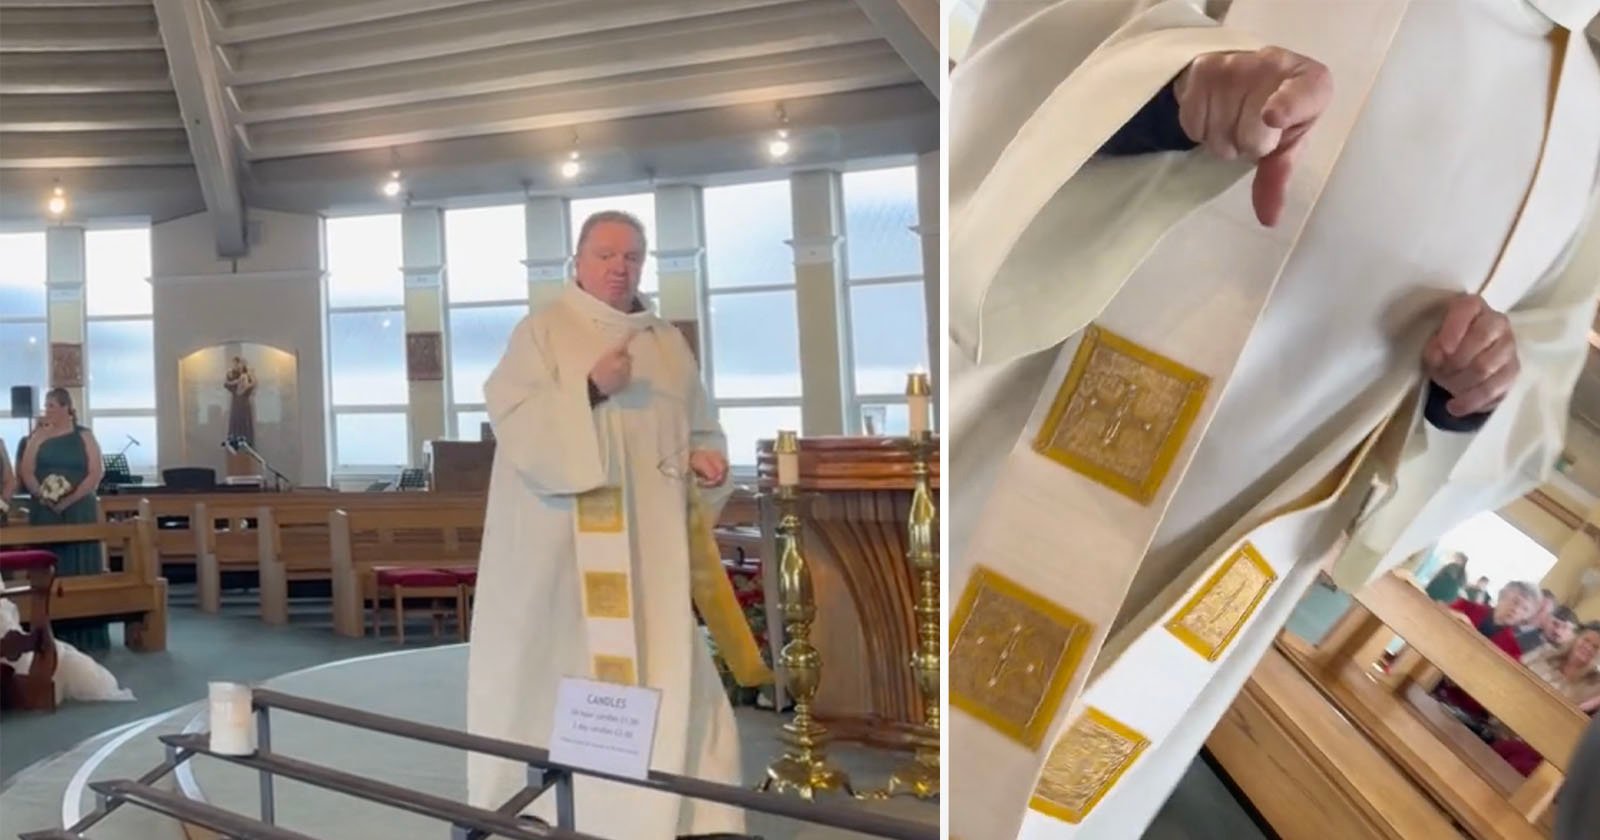 Watch Viral Video of Priest Yelling at Wedding Photographer